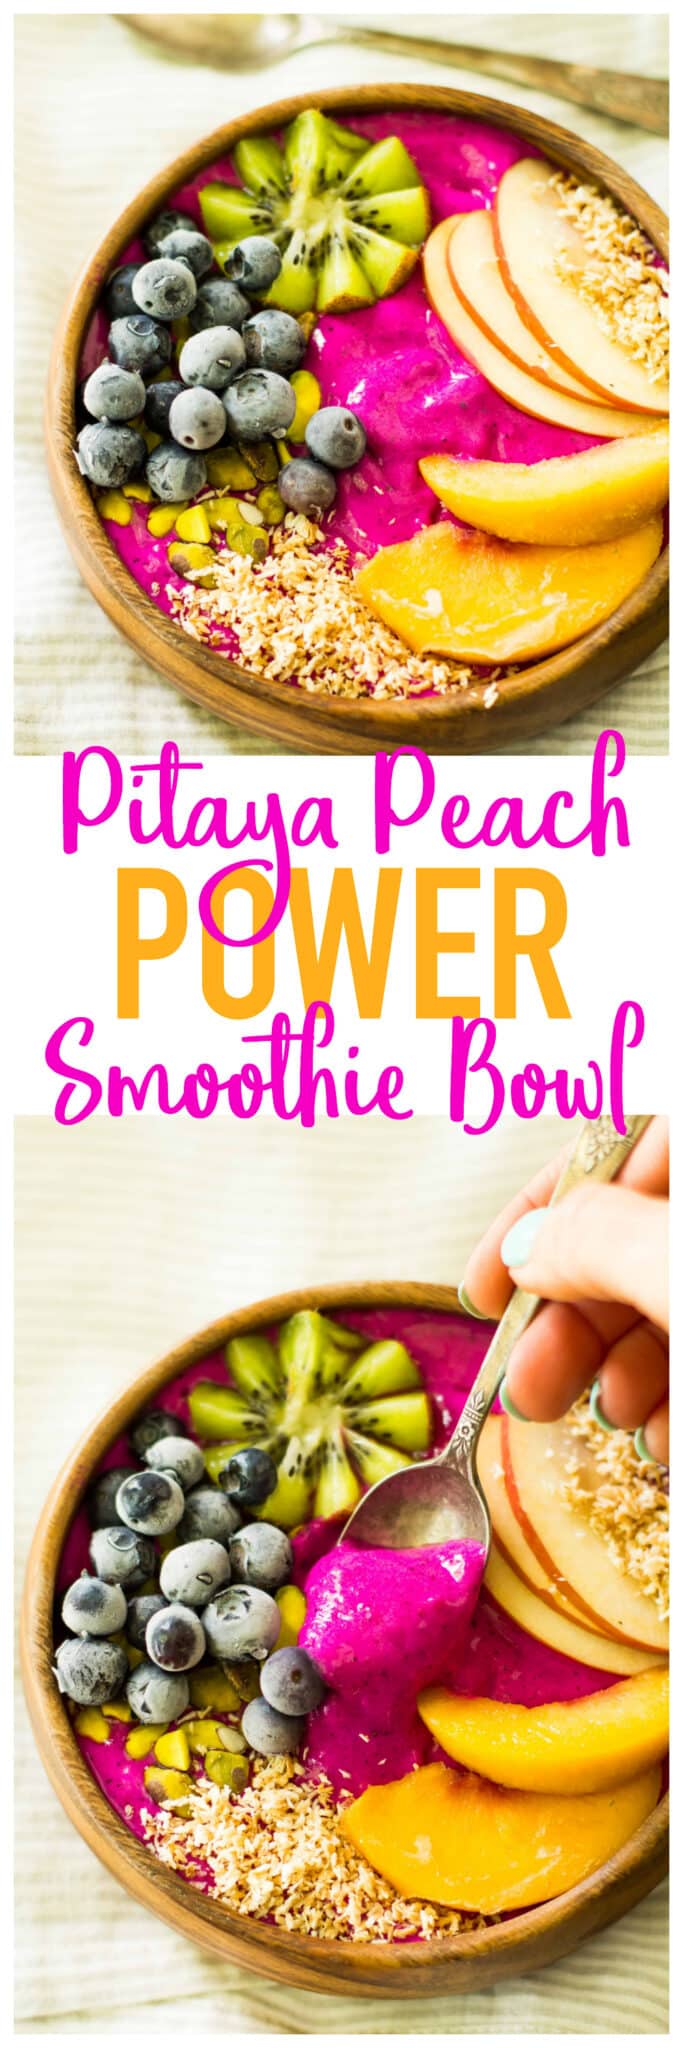 Gorgeous, healthy morning fuel! Pitaya Peach Power Smoothie Bowl is loaded with antioxidants, protein, and fresh flavor. Allergen free and easy to make!